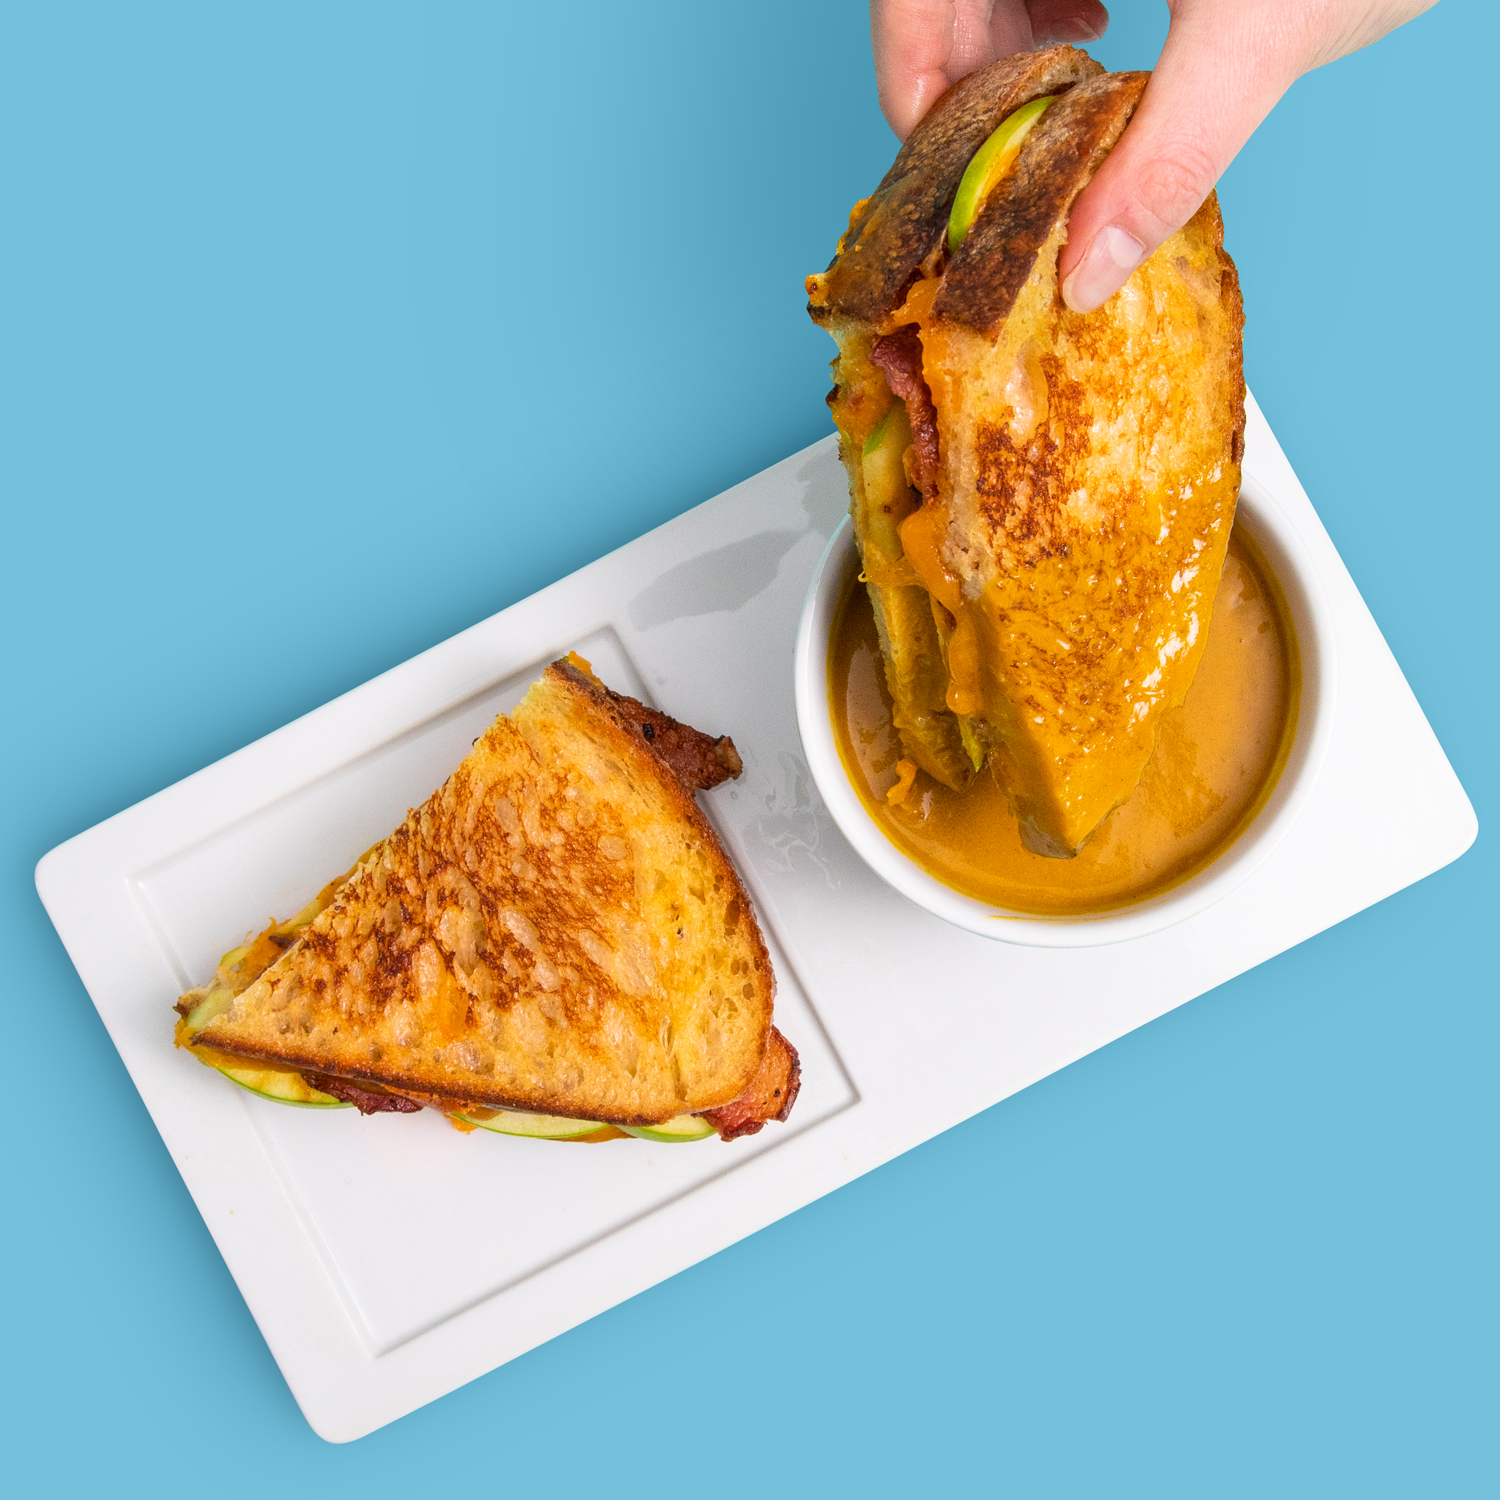 A grilled cheese with avacado, fresh mozzarella, wheat bread, and Proper Good's Butternut Squash Soup